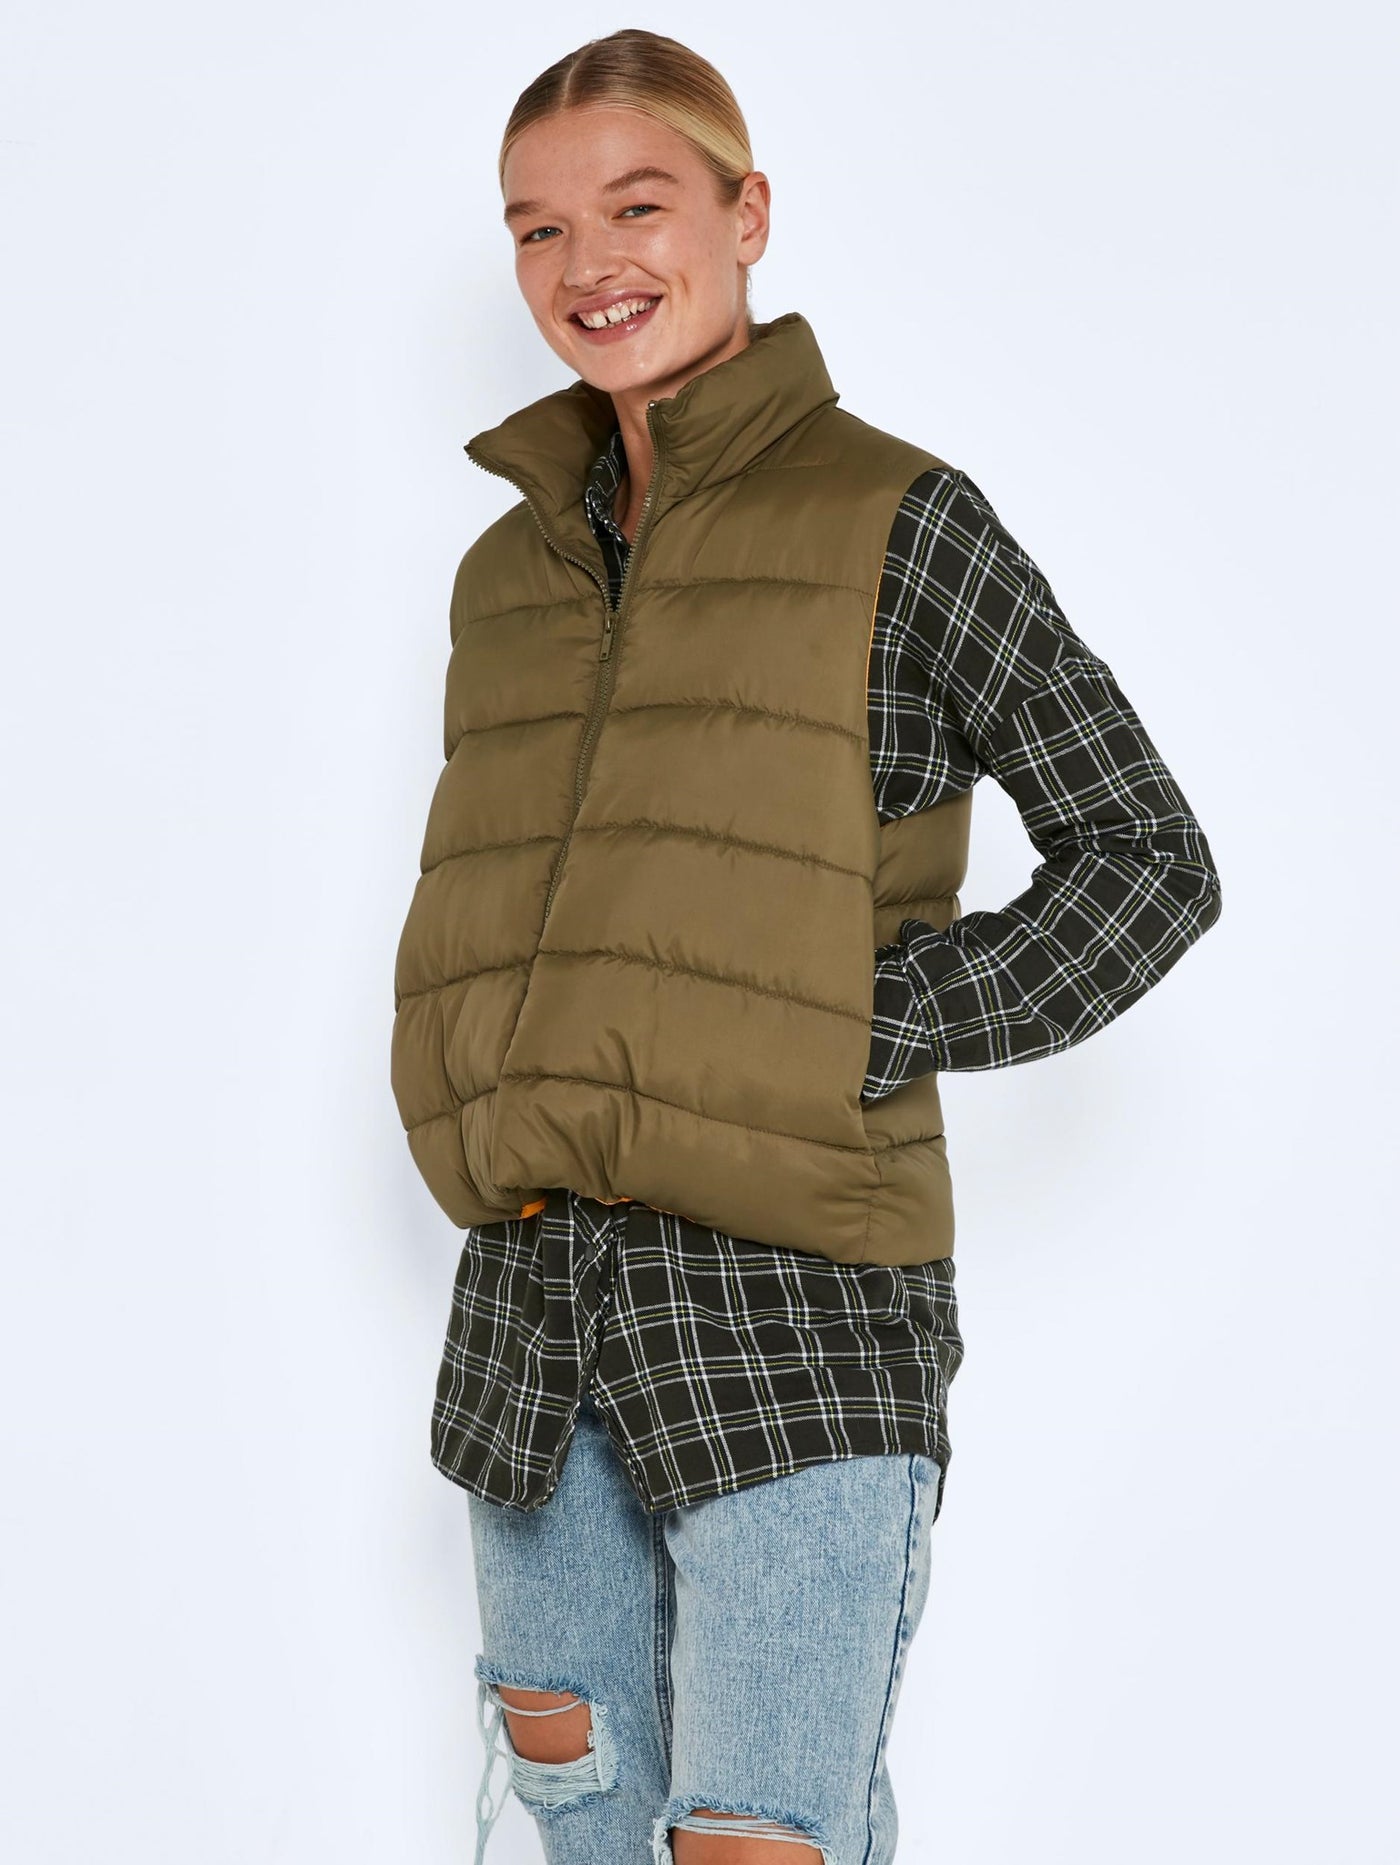 Marcus Puff Vest - Burnt Olive - Noisy May 4